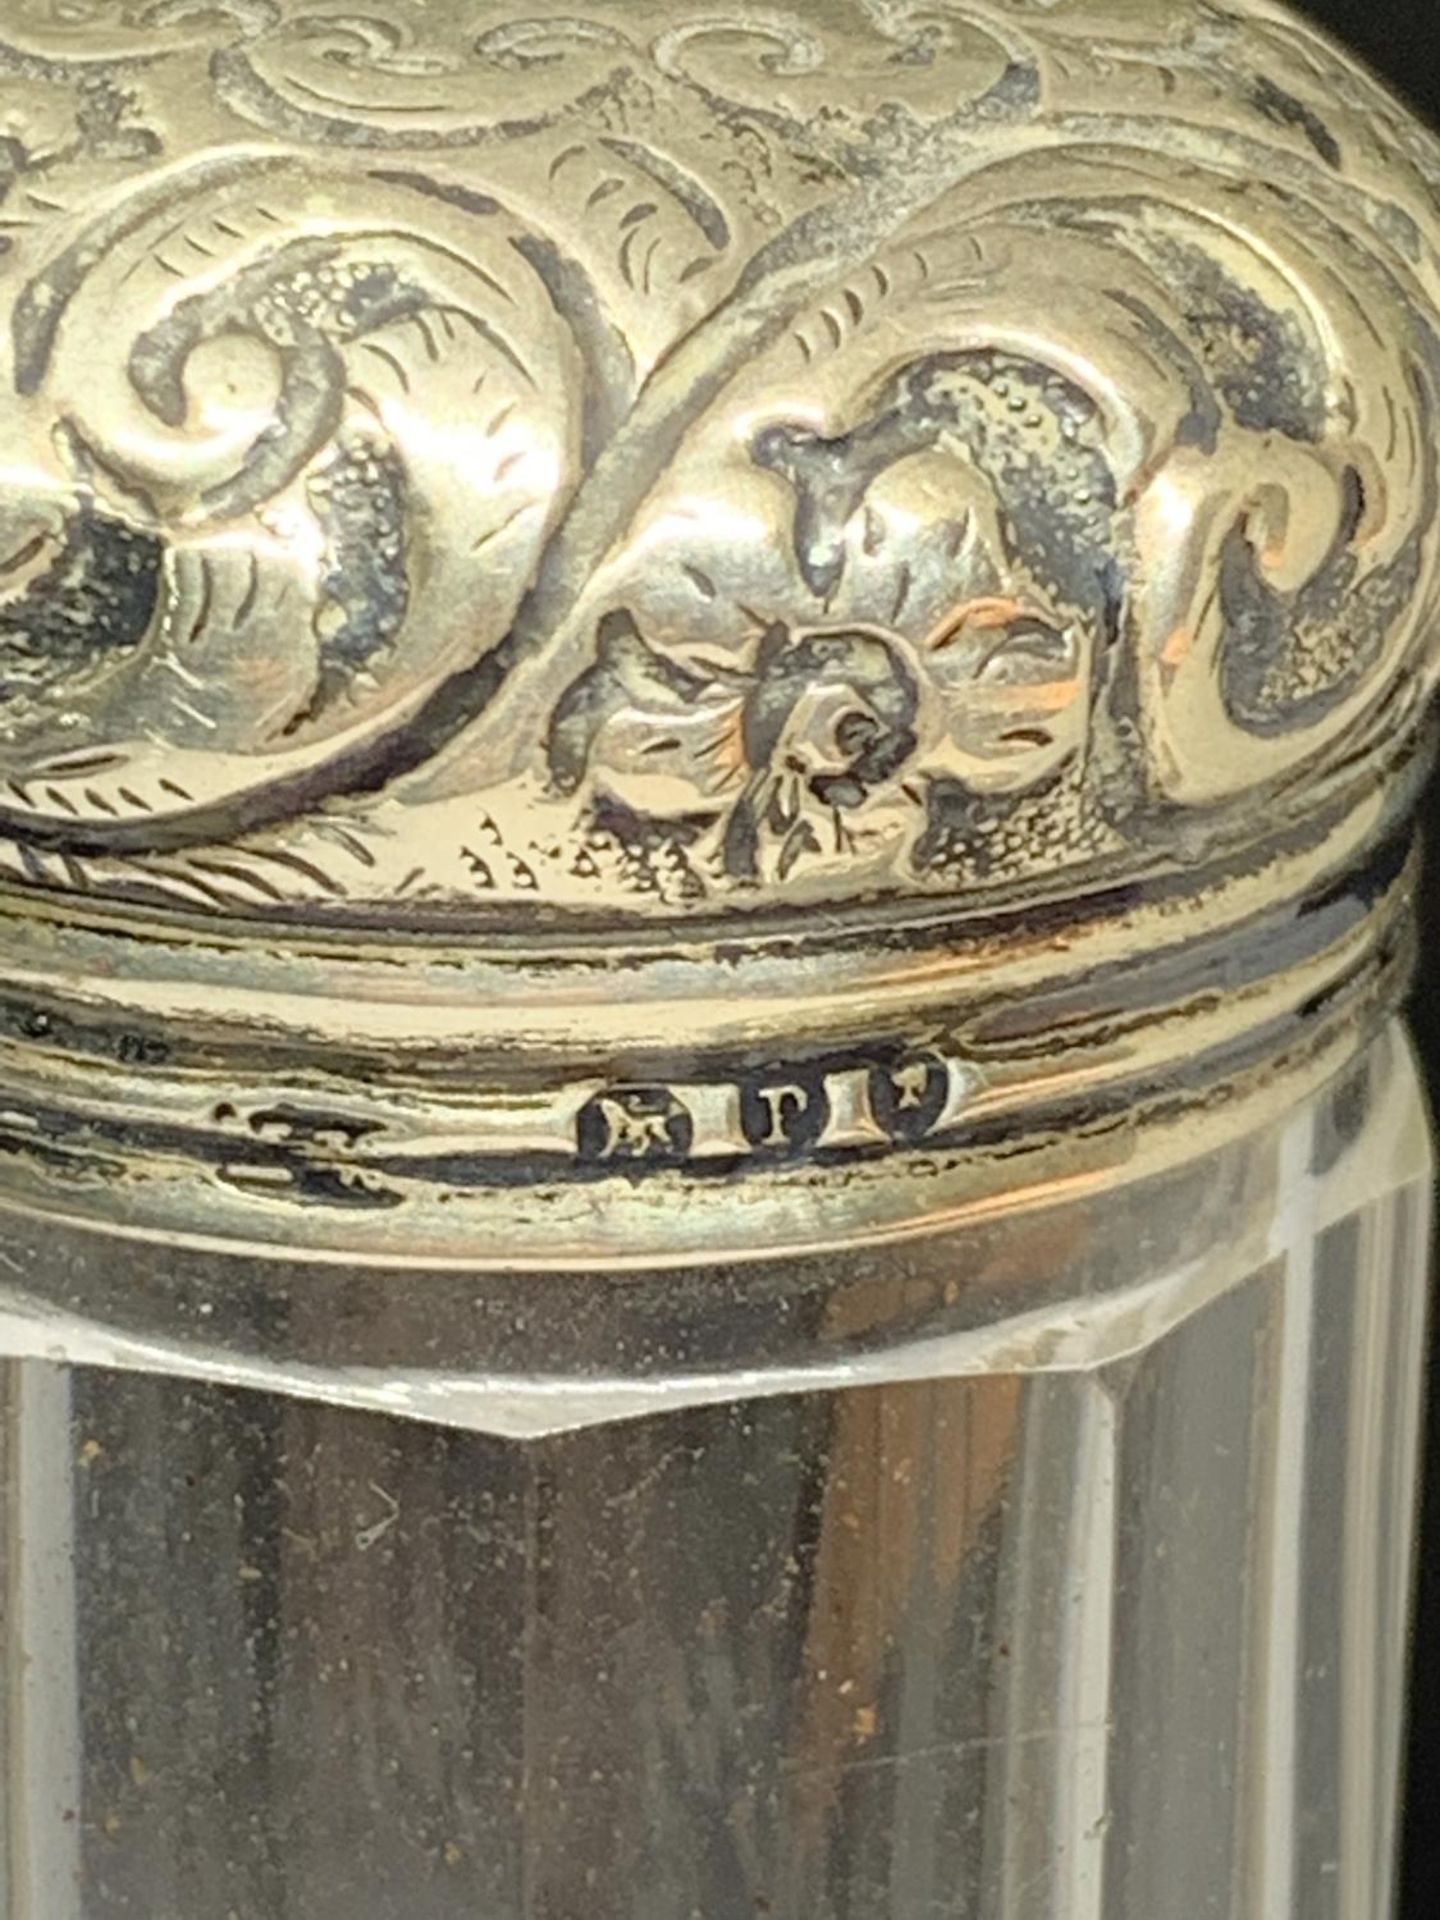 TWO VINTAGE GLASS JARS WITH HALLmaRKED SILVER TOPS ONE BIRMINGHAM AND ONE LONDON - Image 2 of 3